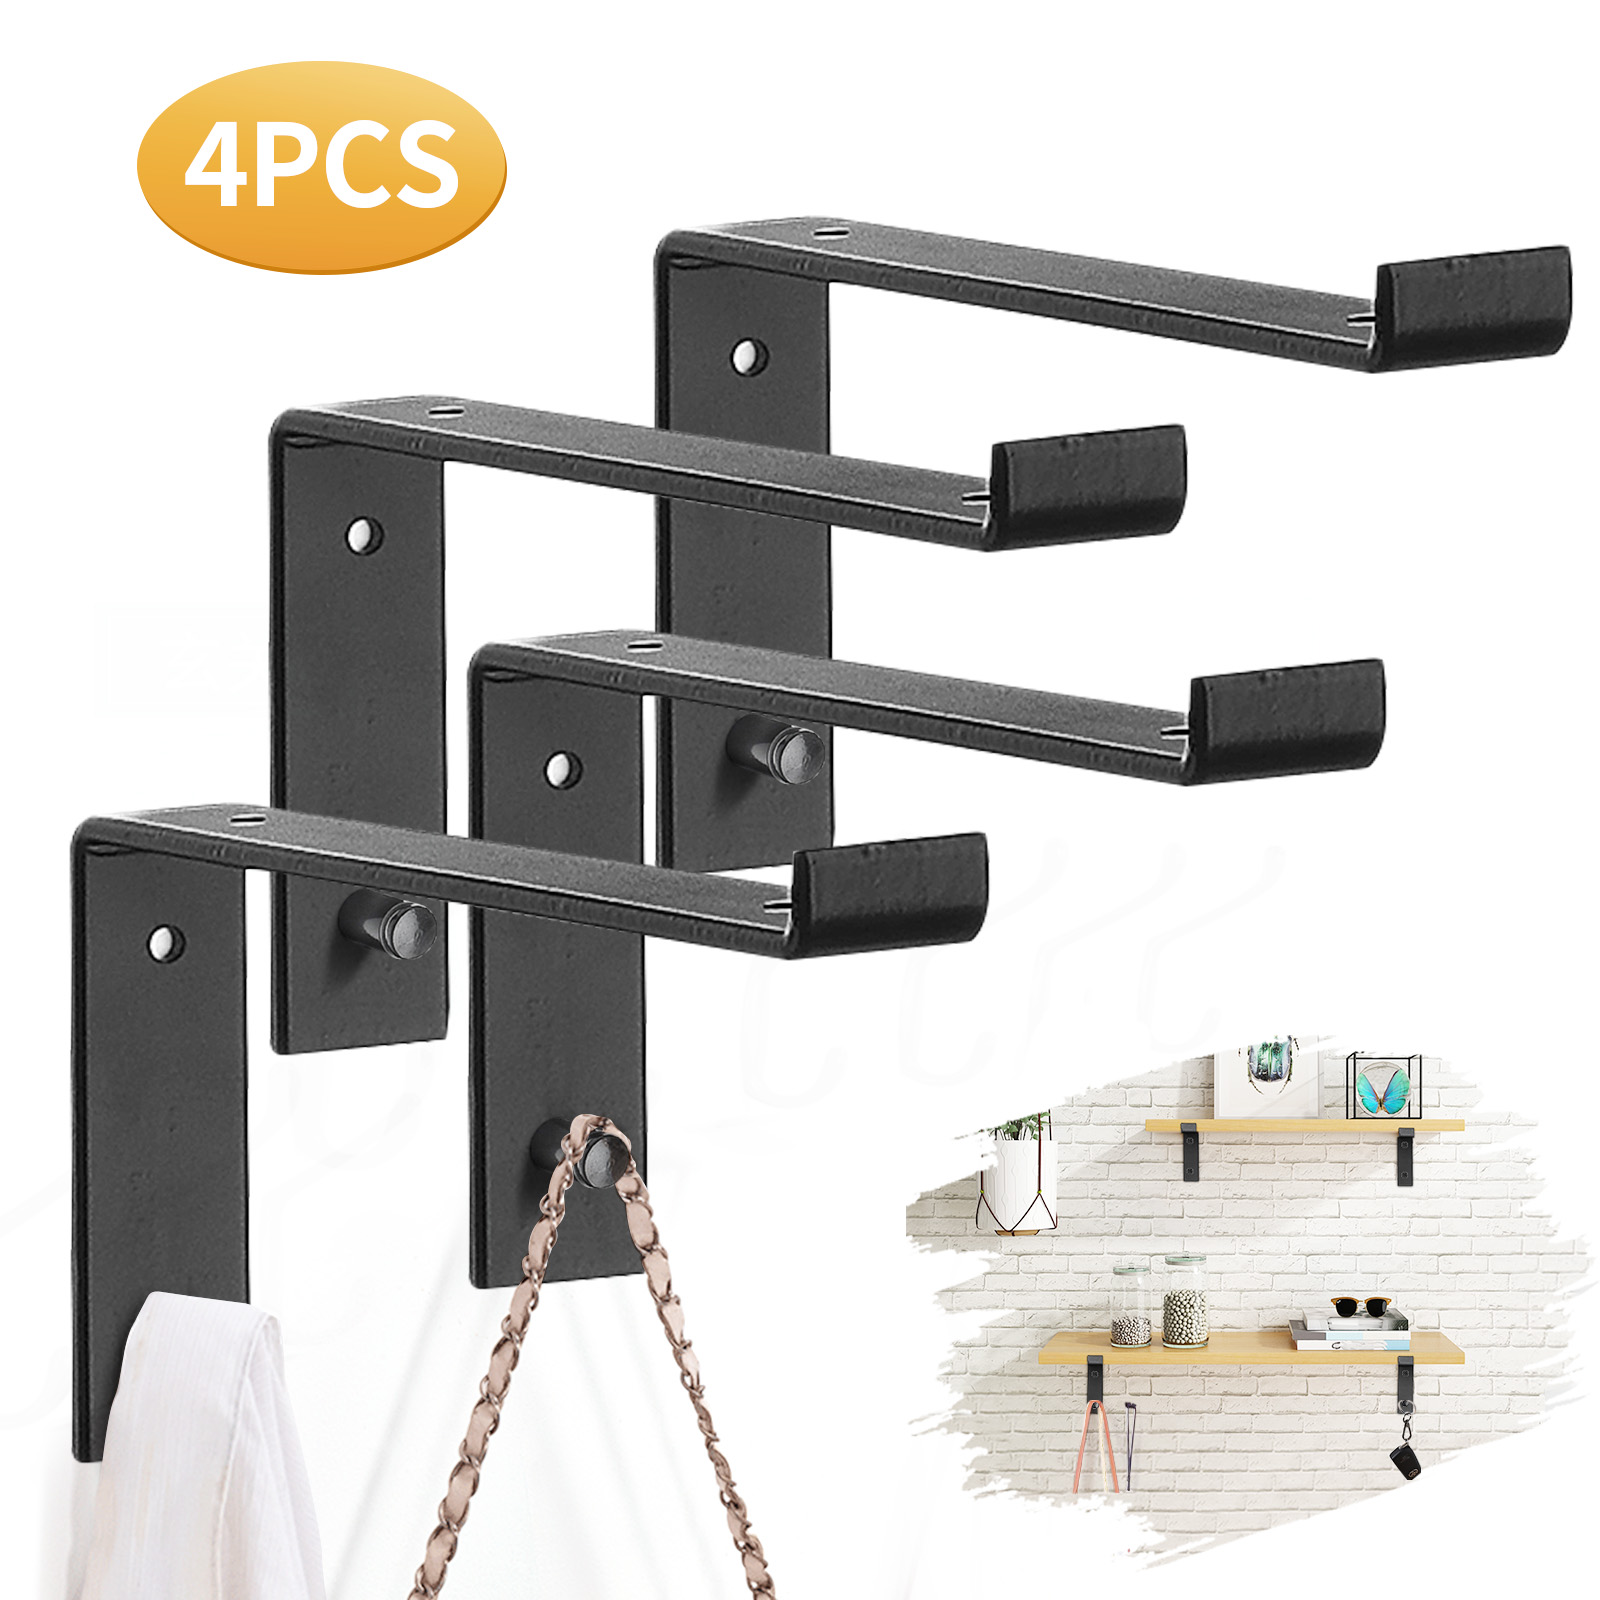 AGSIVO-4PCS-Set-Vintage-with-Hook-Wall-Mounted-Floating-Hanging-Shelf-Board-Support-Holder-1822453-1